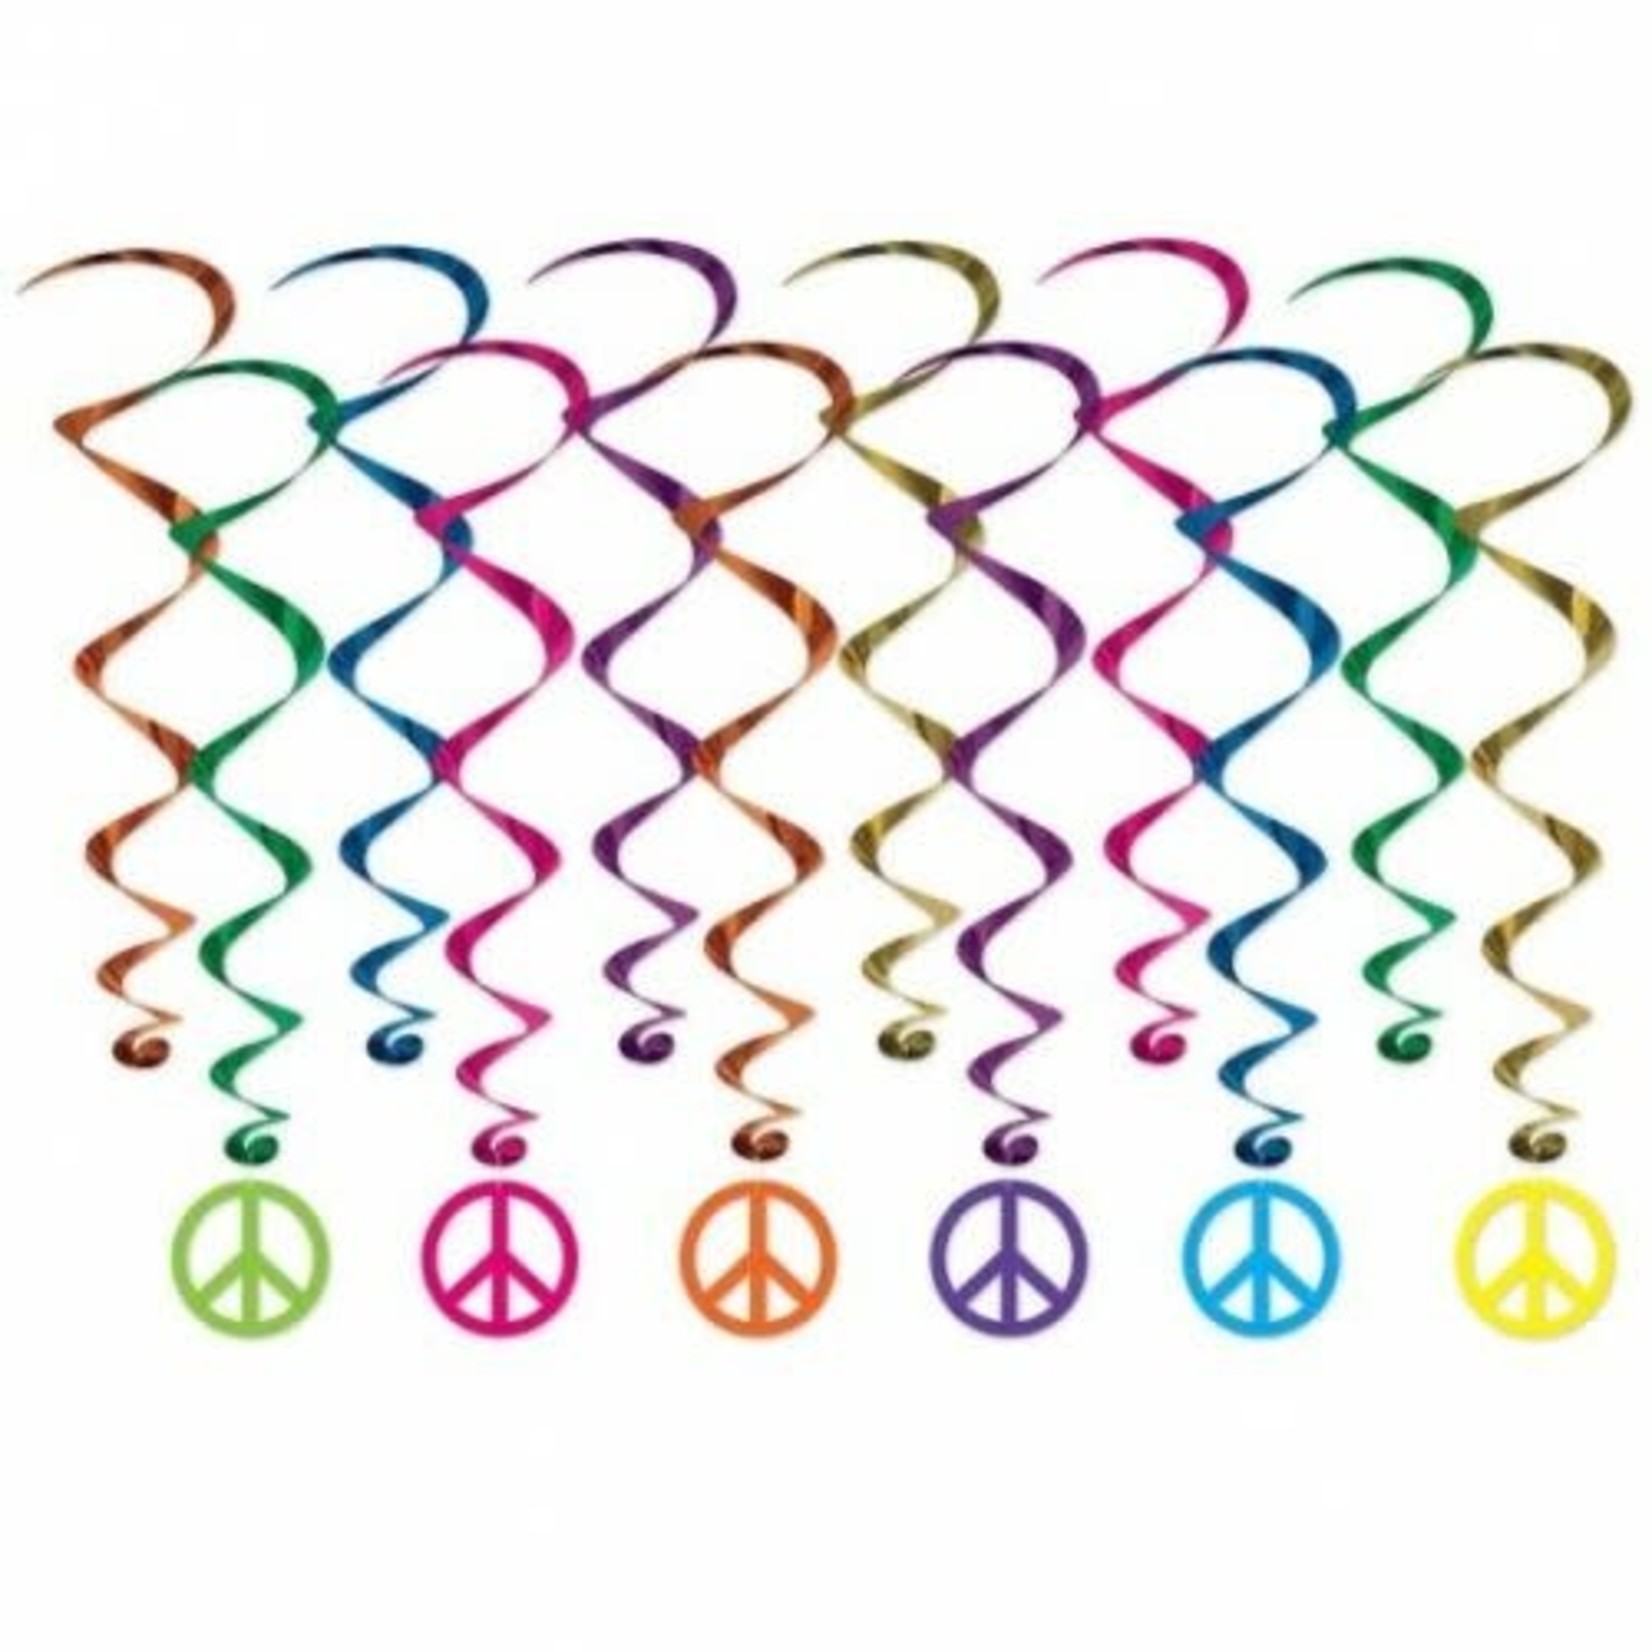 Beistle Peace Sign Hanging Whirls - 5ct. (Asst. Colors)